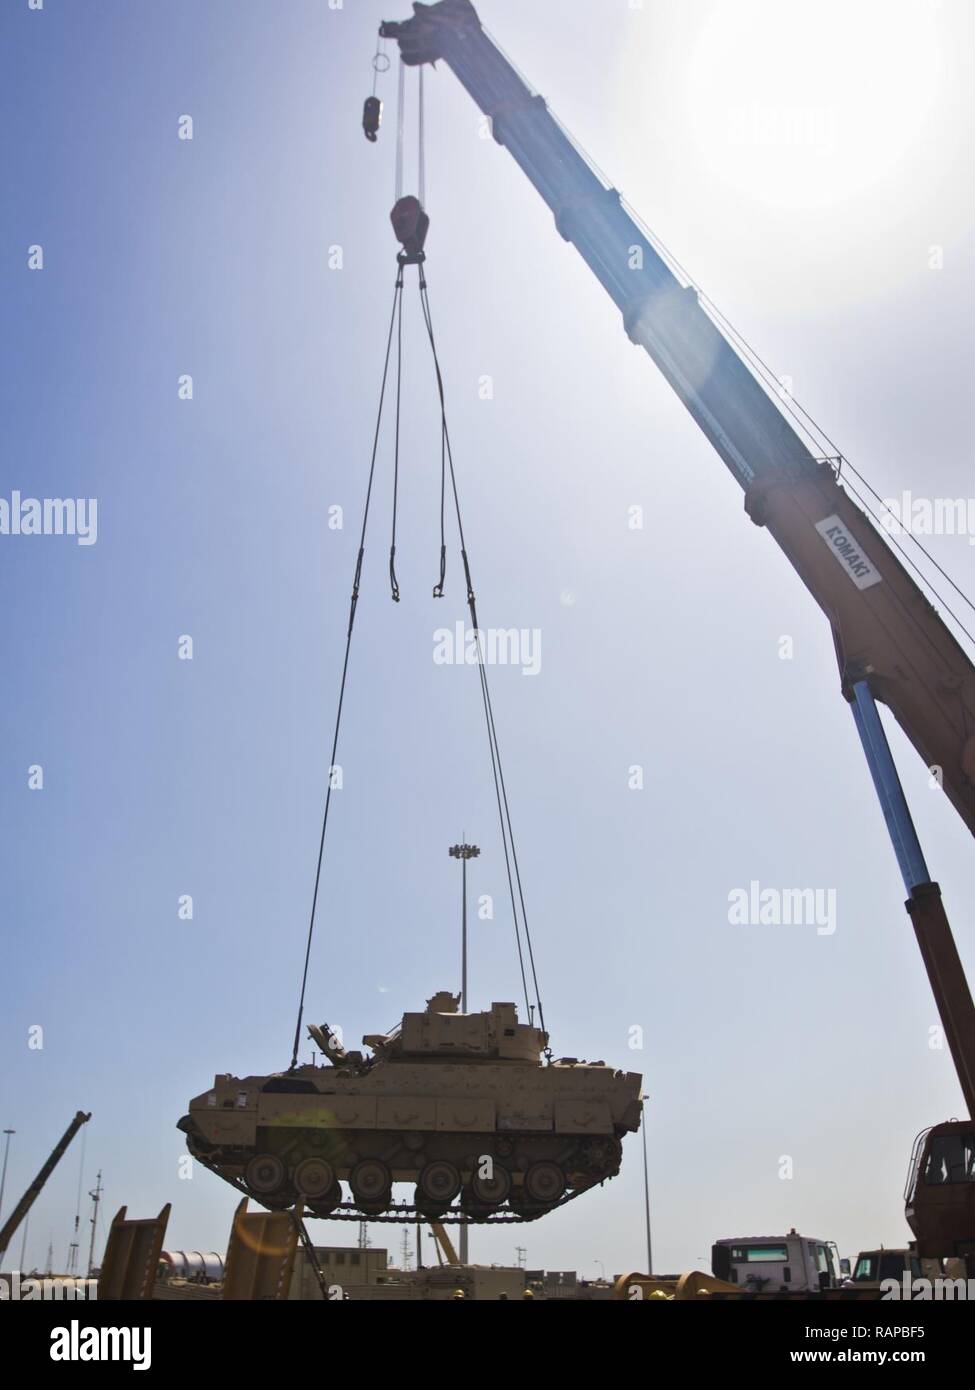 A M2/M3 Bradley Fighting Vehicle is transported via crane onto a flat bed truck to be put on the USNS Mendonca at Shuaiba Port, Kuwait, on Feb. 28, 2017. The Mendonca is used to import and export U.S. Military vehicles in support of operations in the USCENTCOM AOR. Stock Photo